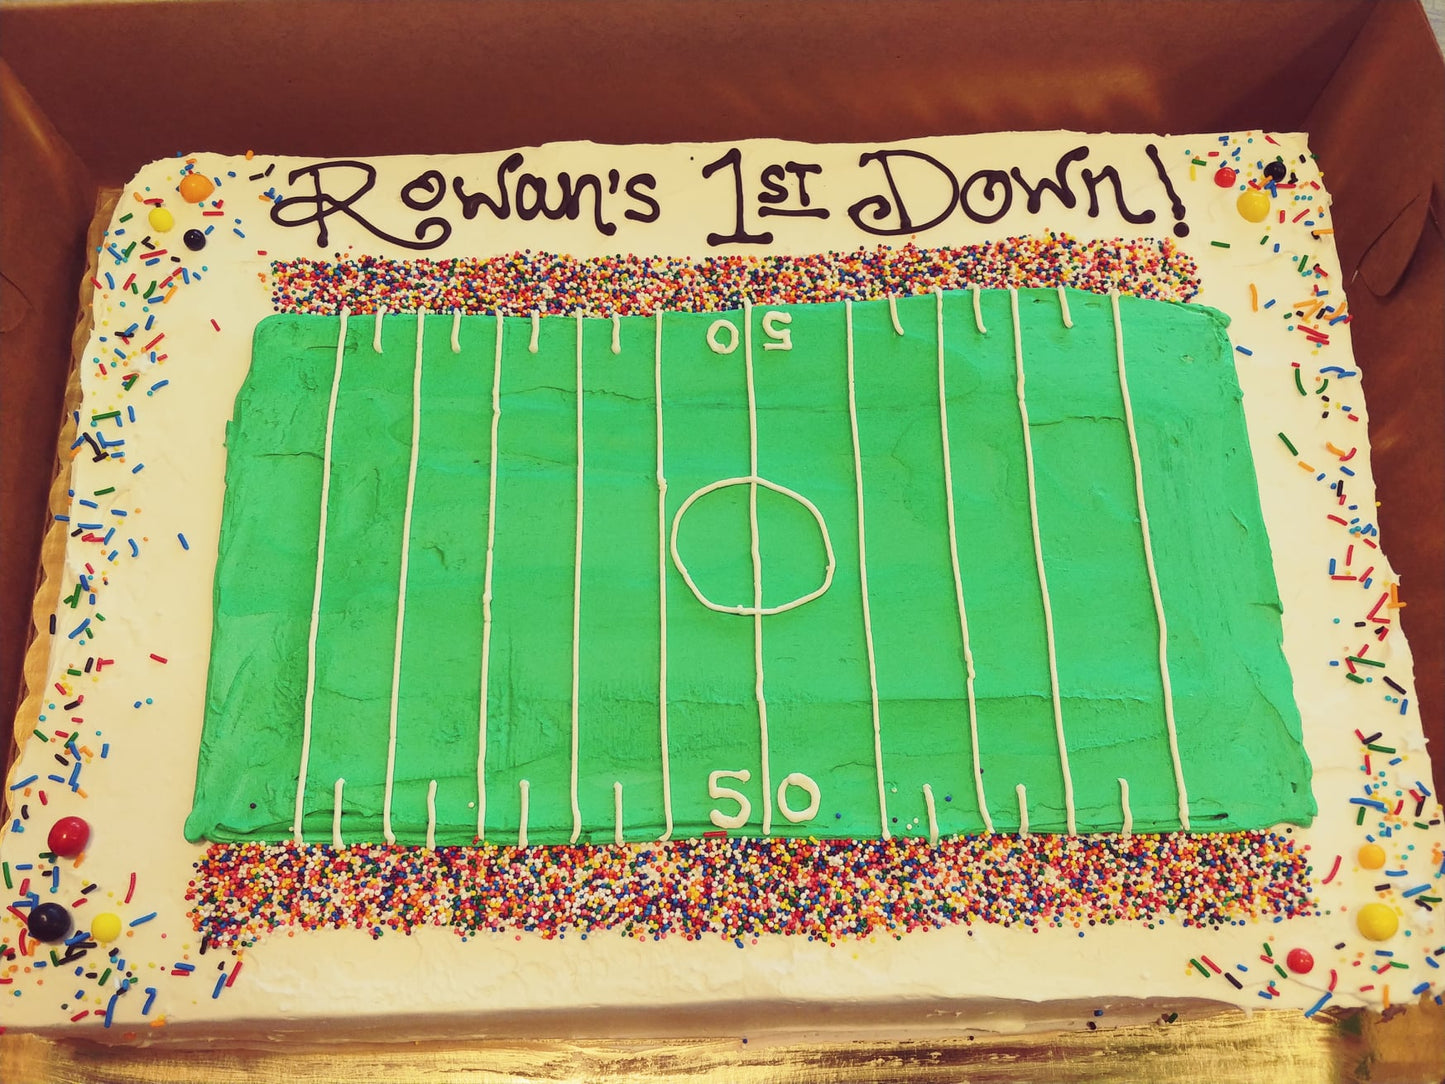 Football themed birthday cake for baby, toddler, child, adult. Sheet cake, delicous.